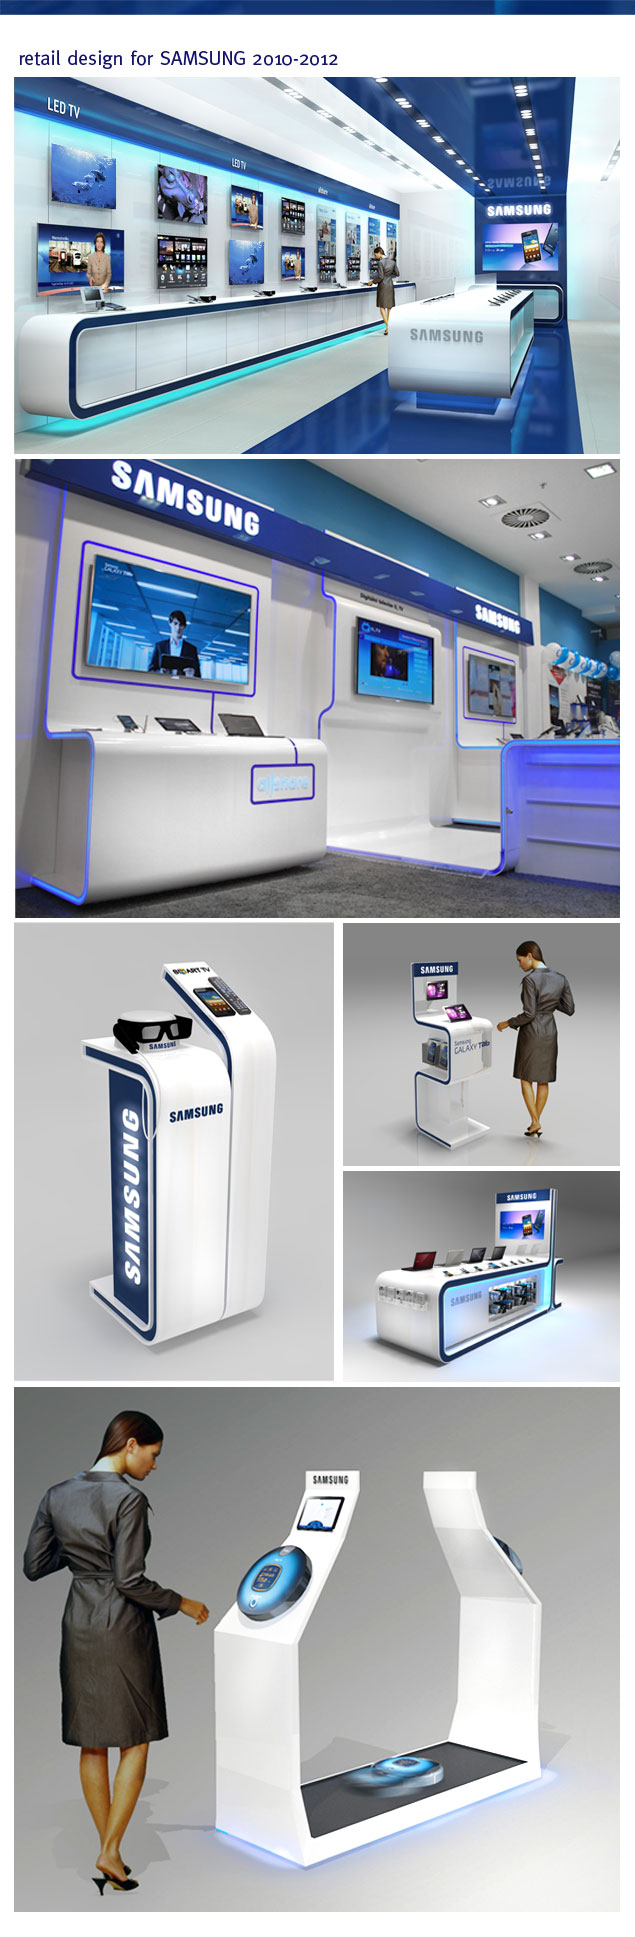 Retail design for Samsung by optimat